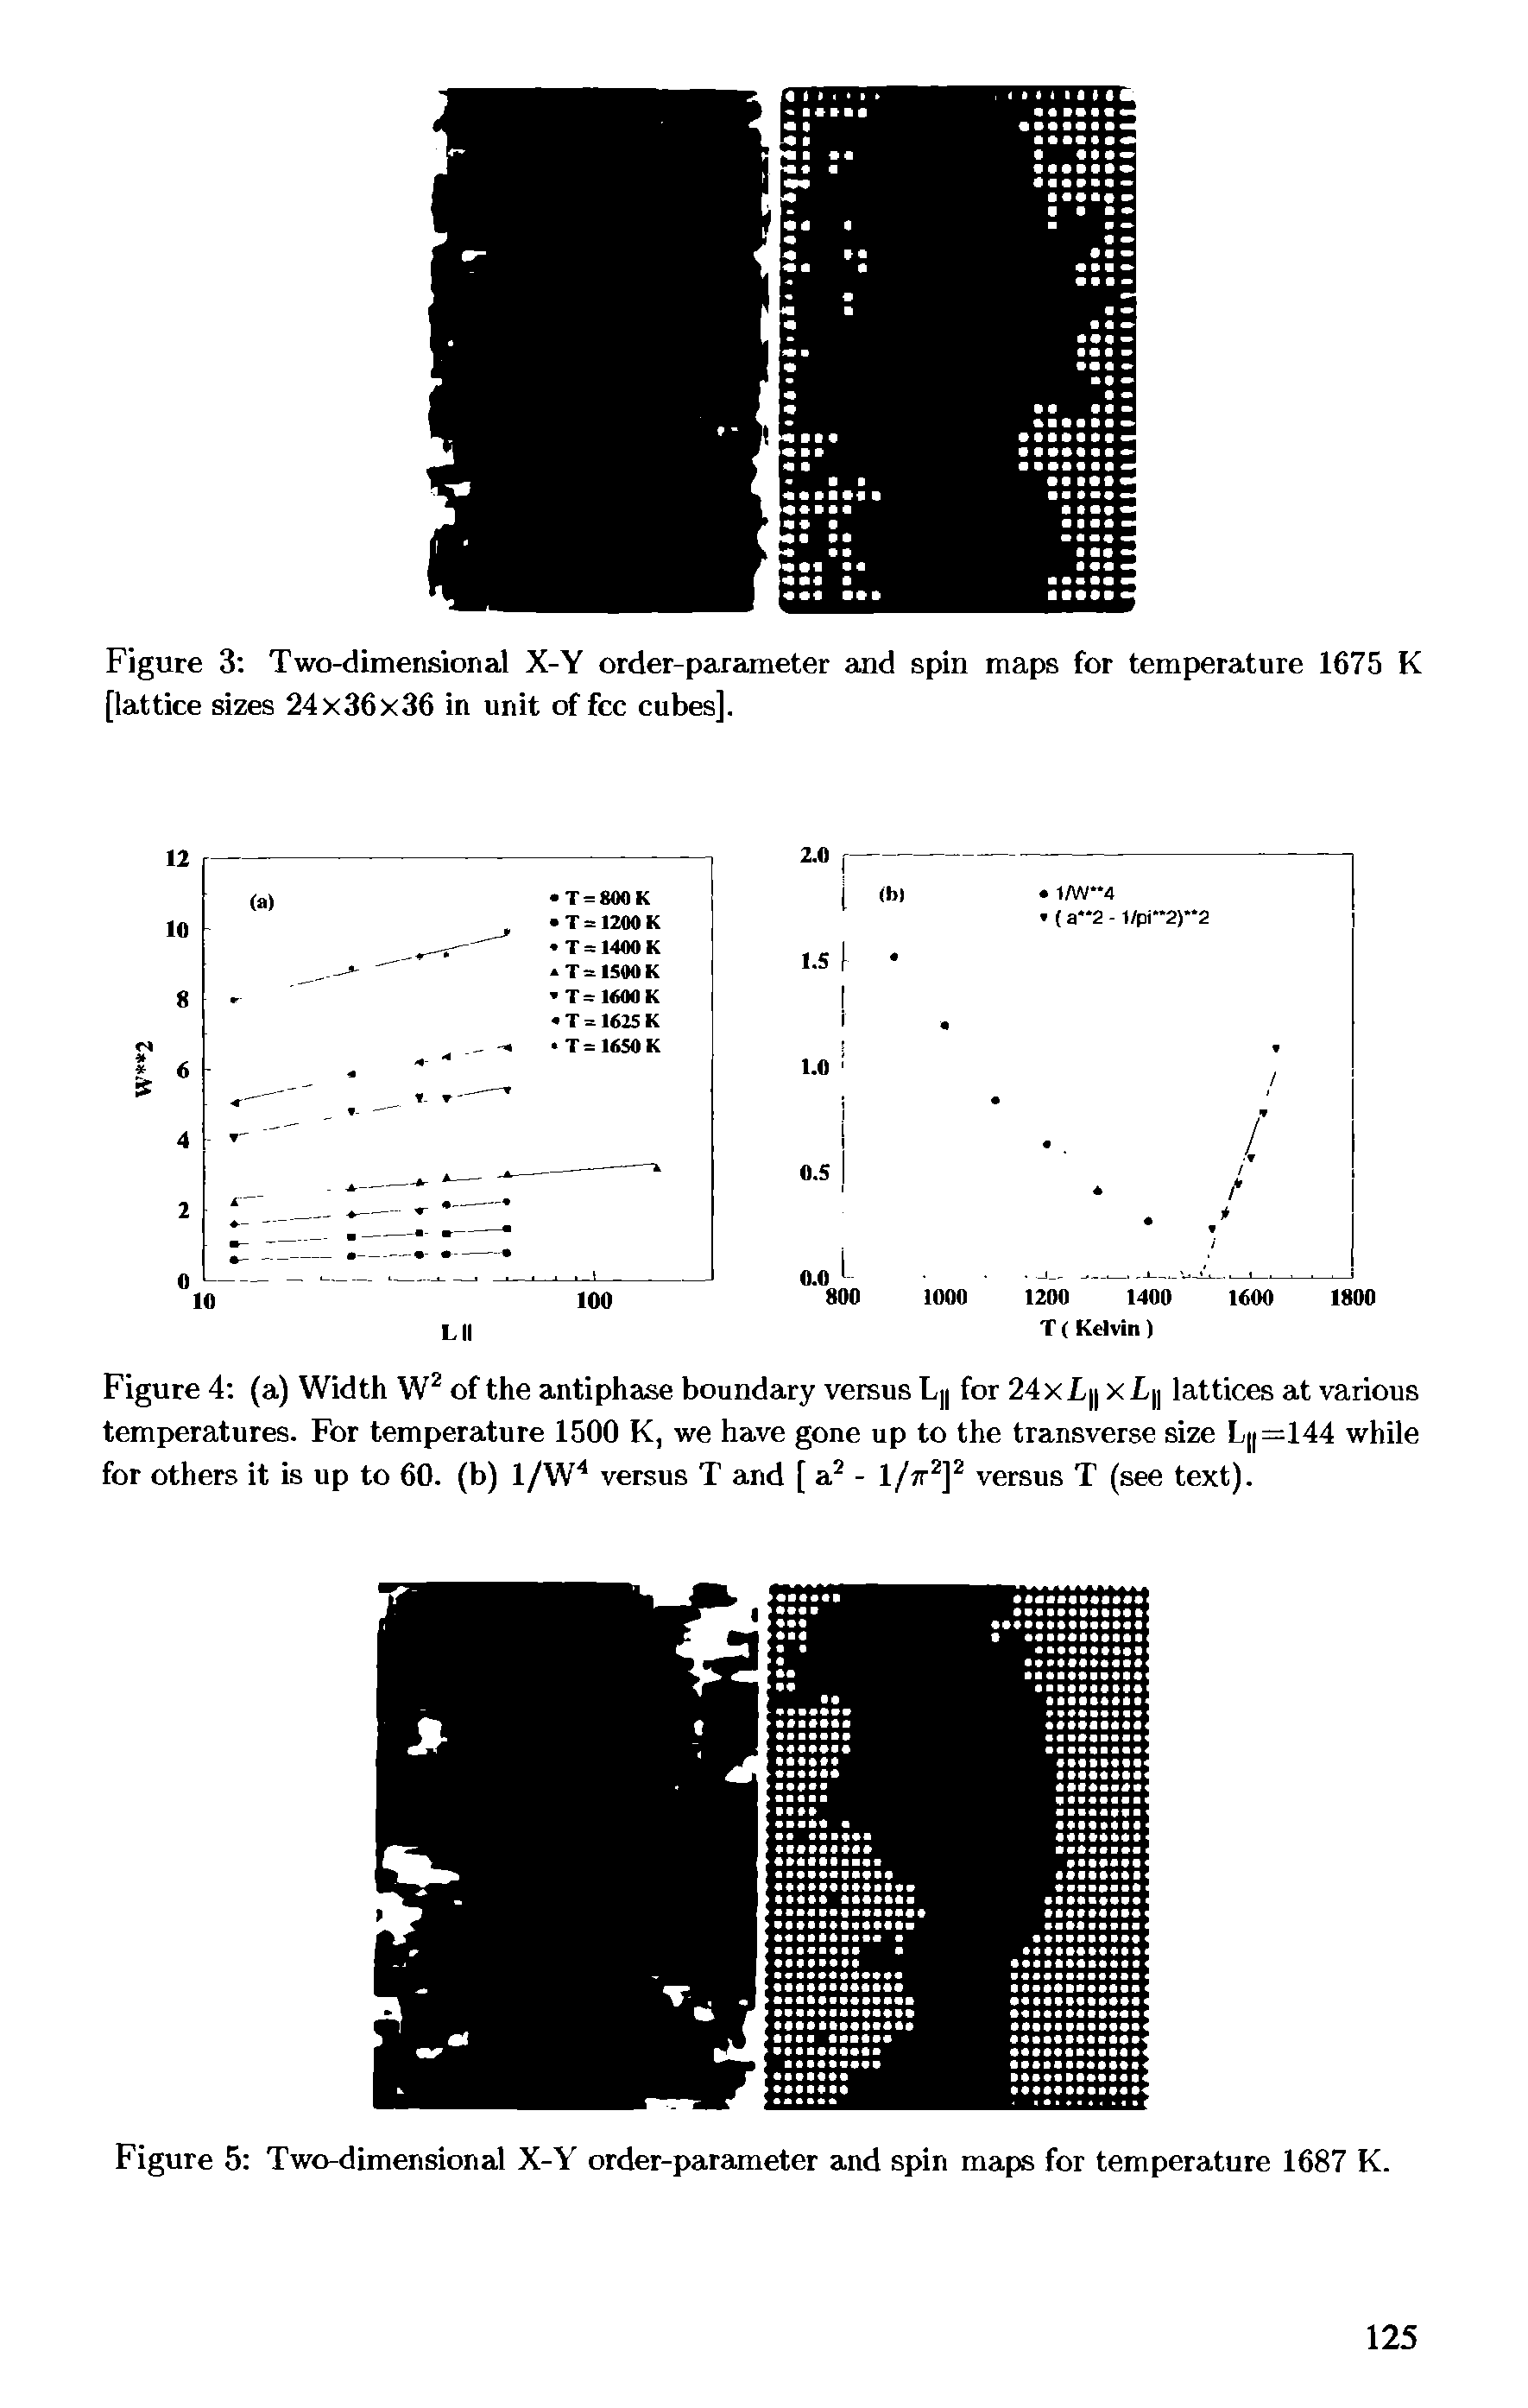 Figure 3 Two-dimensional X-Y order-parameter and spin maps for temperature 1675 K [lattice sizes 24x36x36 in unit of fee cubes].